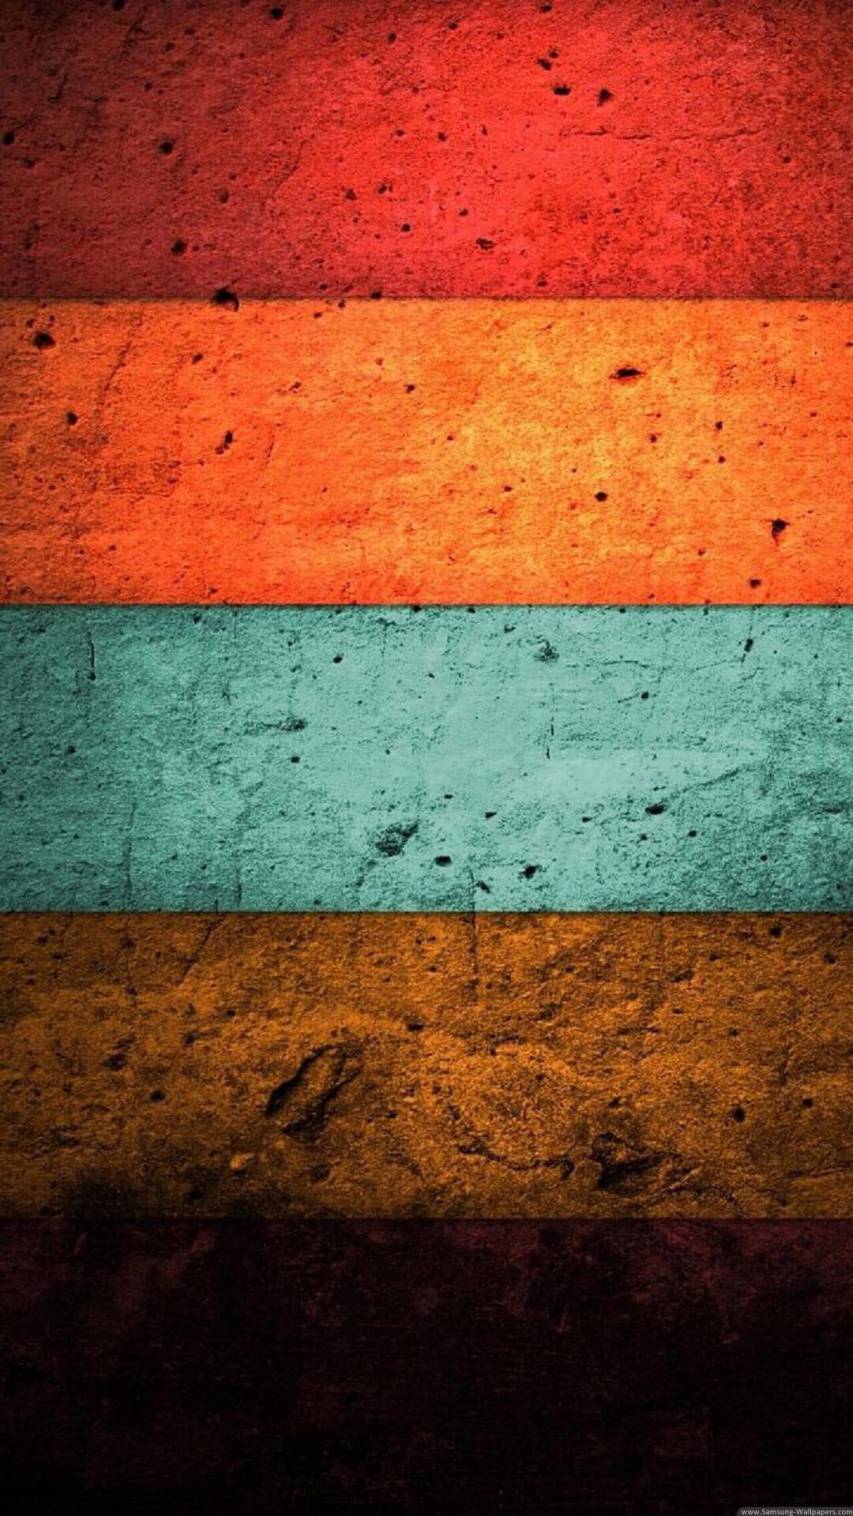 IPhone wallpaper with colorful stripes on a dark background - Retro